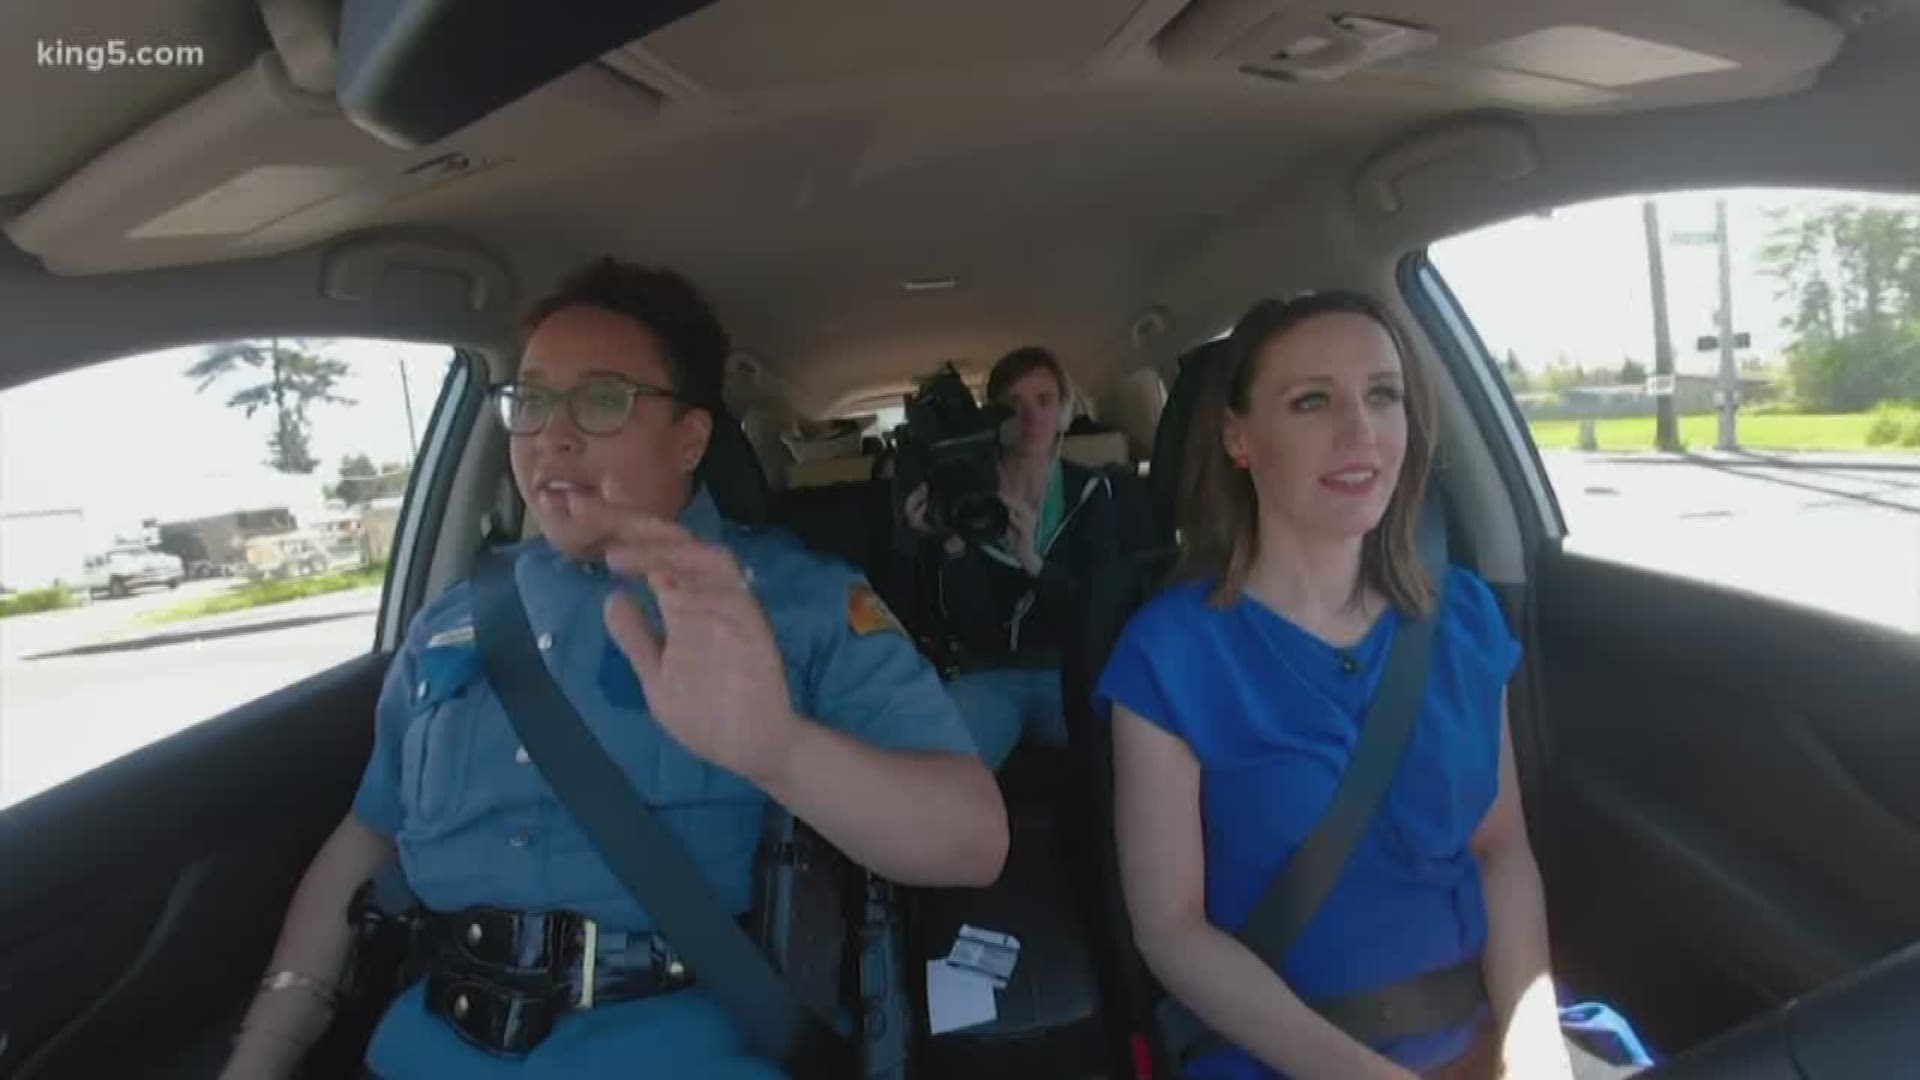 With a long holiday weekend coming up and summer right around the corner, chances are you have a road trip or two planned. But what are the best ways to get ready for one? Trooper Johnna Batiste with the Washington State Patrol allowed photojournalist Emily Landeen and Kaci Aitchison to take her on a mini road trip to share her tips.